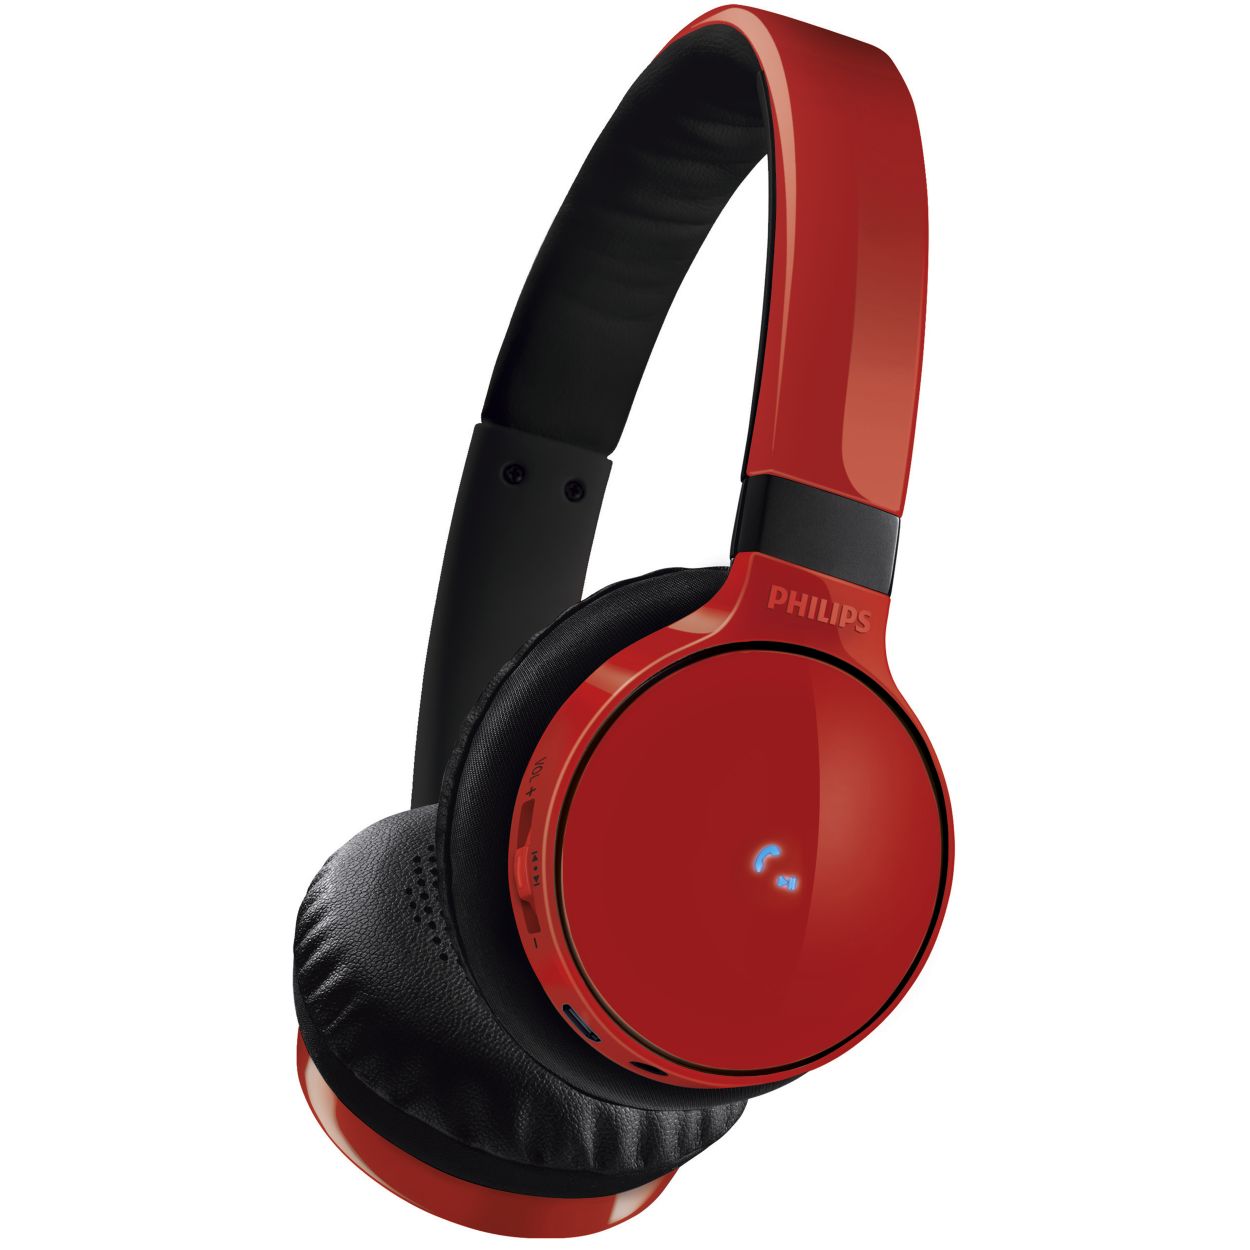 stereo headset SHB9100RD/00 | Philips